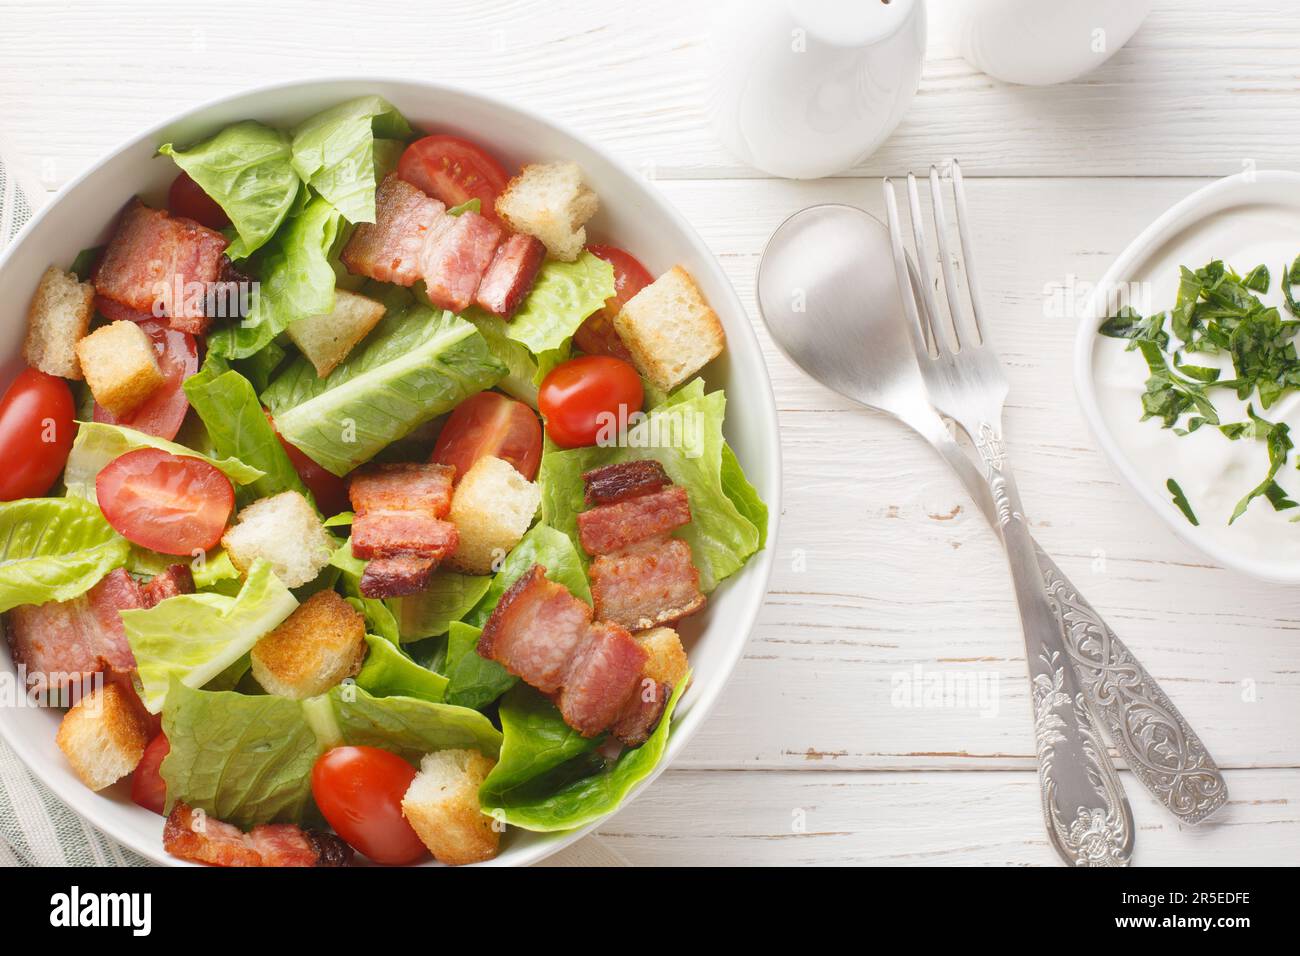 BLT salad with romaine lettuce, pieces of crispy bacon, tomatoes, crunchy croutons, and a creamy garlic dressing closeup on the plate on the table. Ho Stock Photo